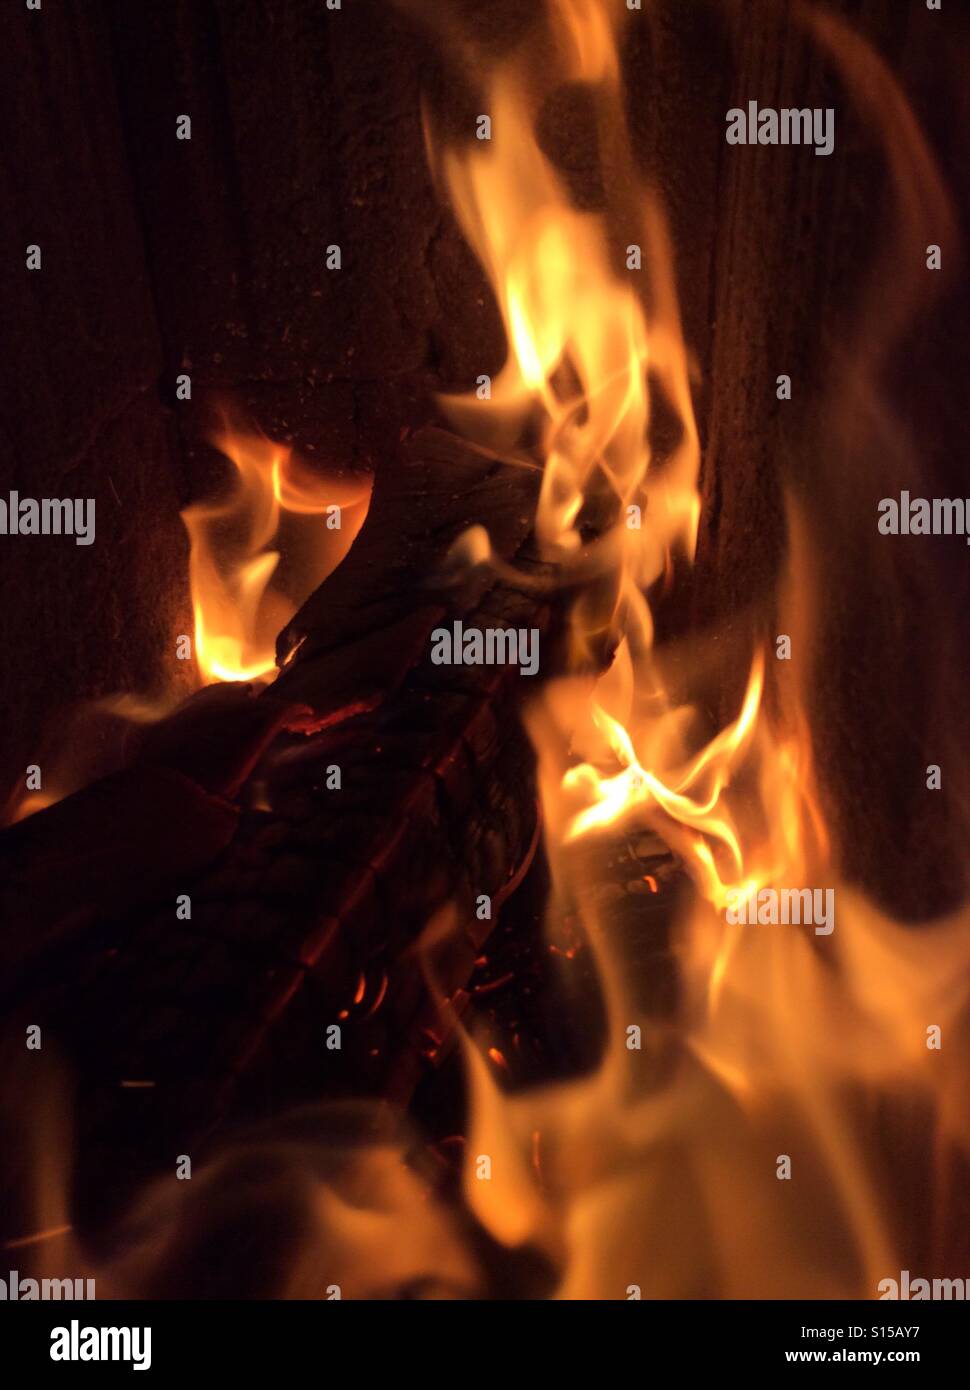 Close-up of flames in an open fire place Stock Photo